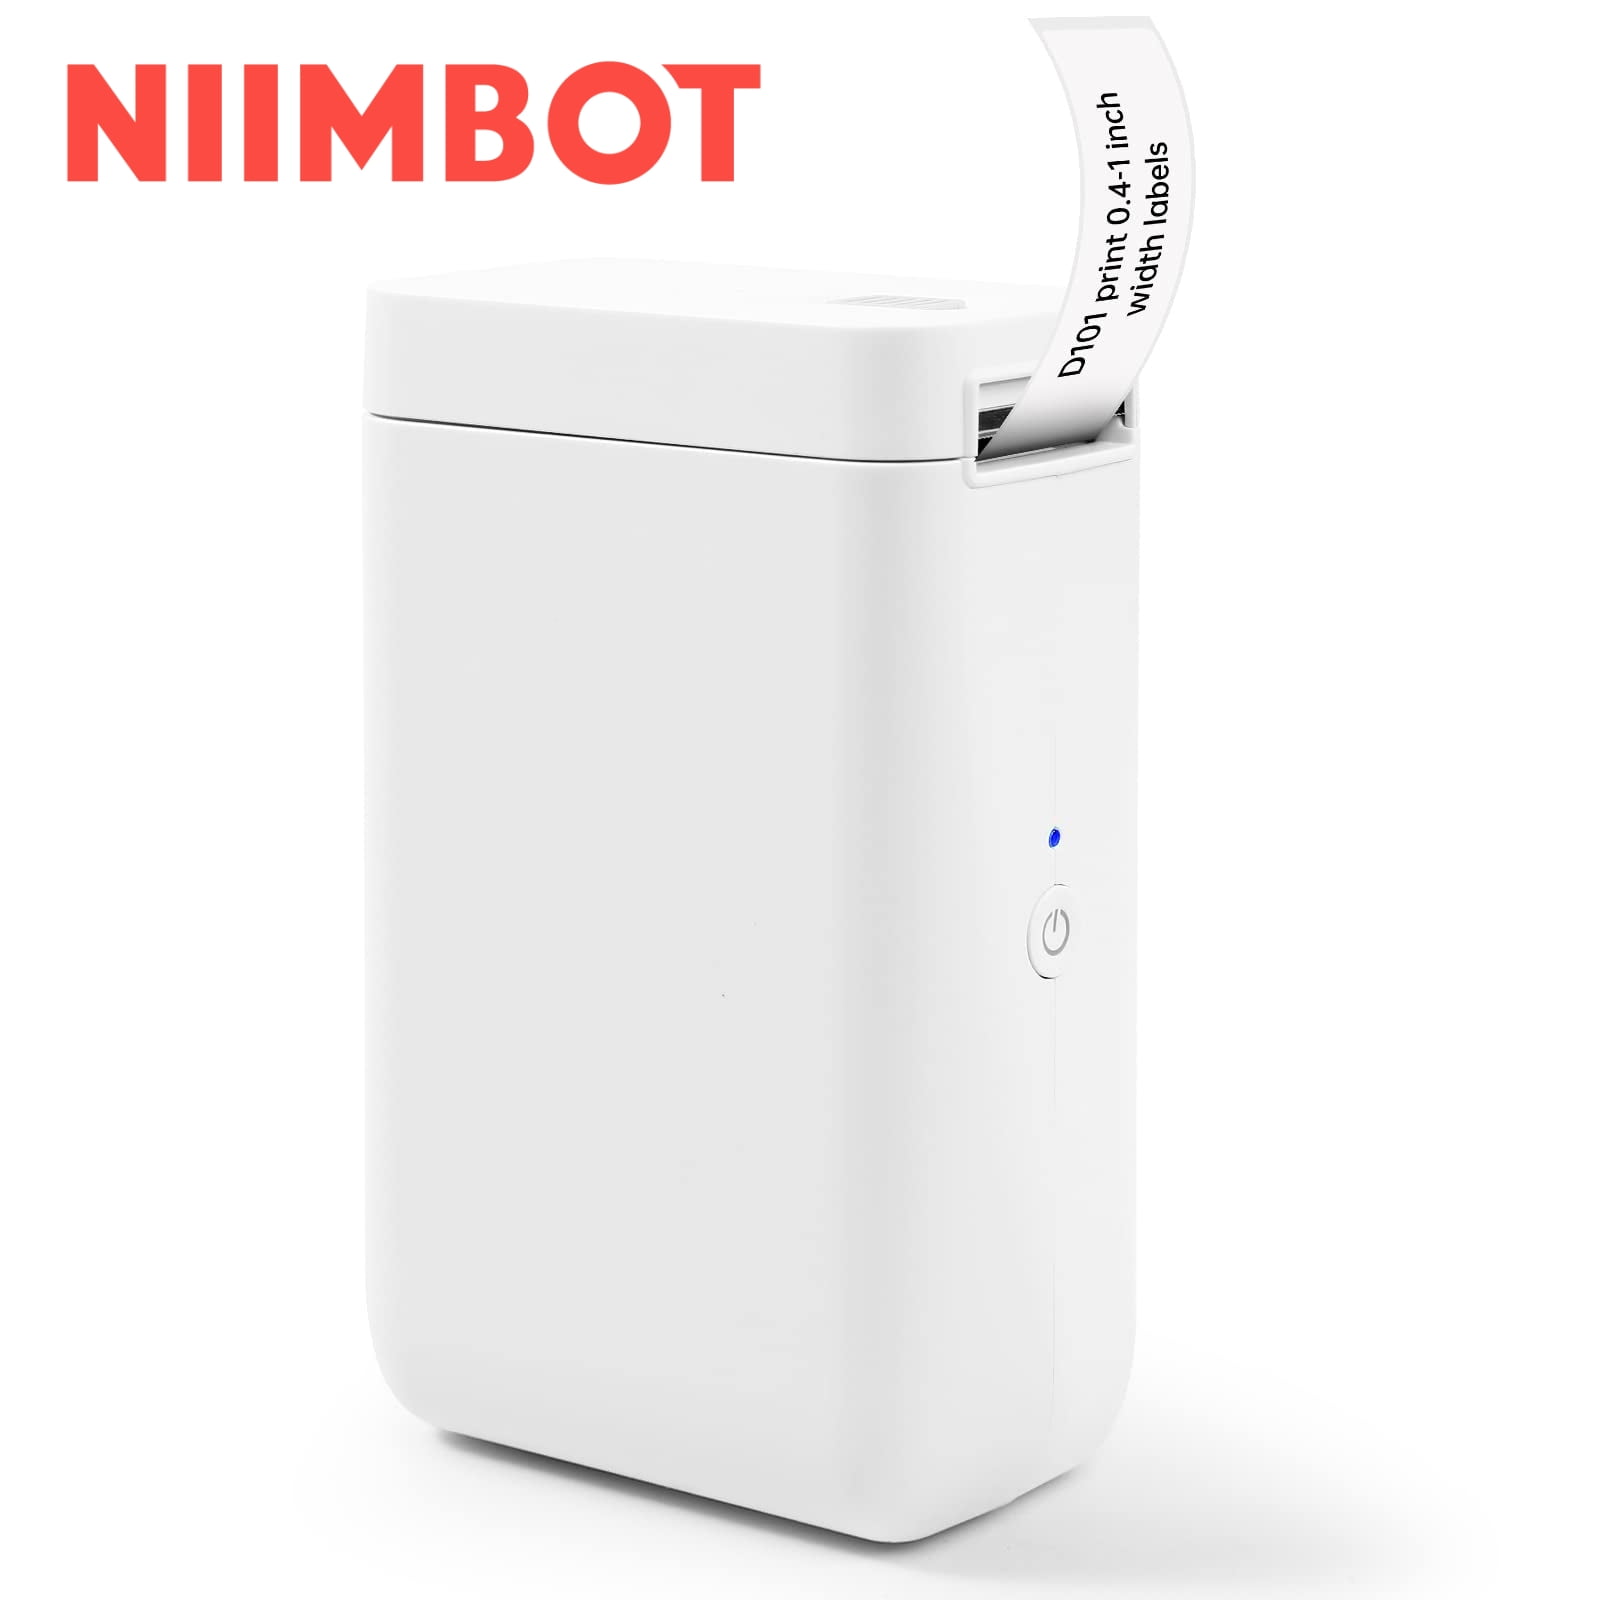 NIIMBOT B21 Label Maker, Thermal Label Printer, Portable Inkless Label  Makers for Home/Office/Business, with 1 Pack 50x30mm White Label,  Compatible